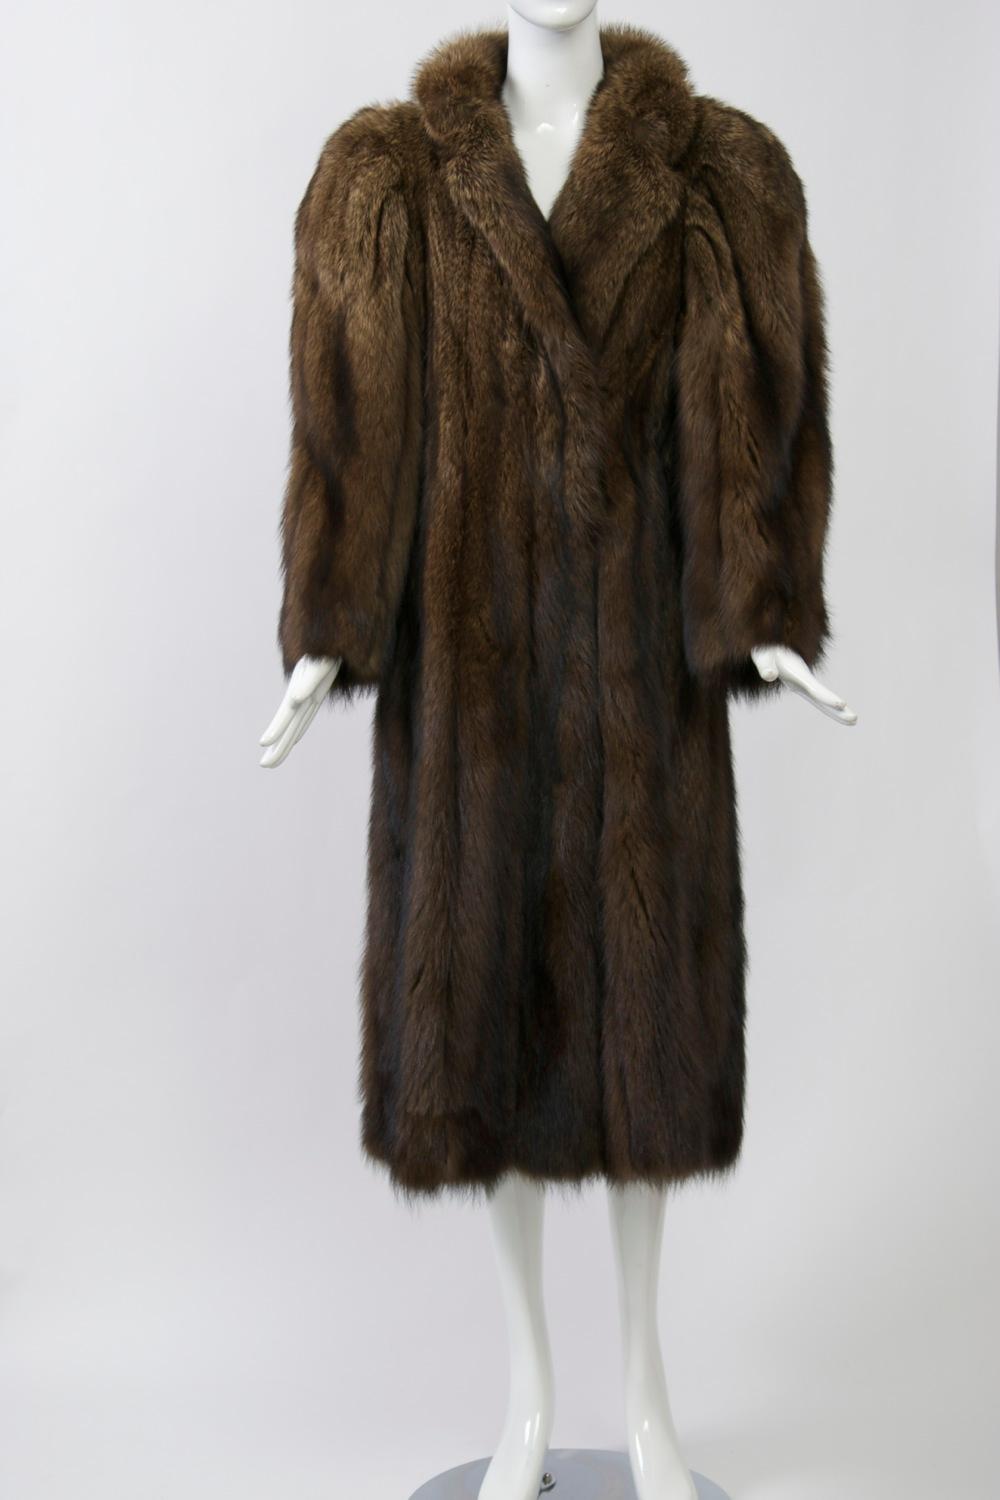 Luxurious fisher coat by Alixandre, known for high quality furs. Simple styling featuring a notched collar and round, padded shoulders, the vertical skins falling to mid-calf length. Hidden side pockets, fur hook closures in front and button at neck